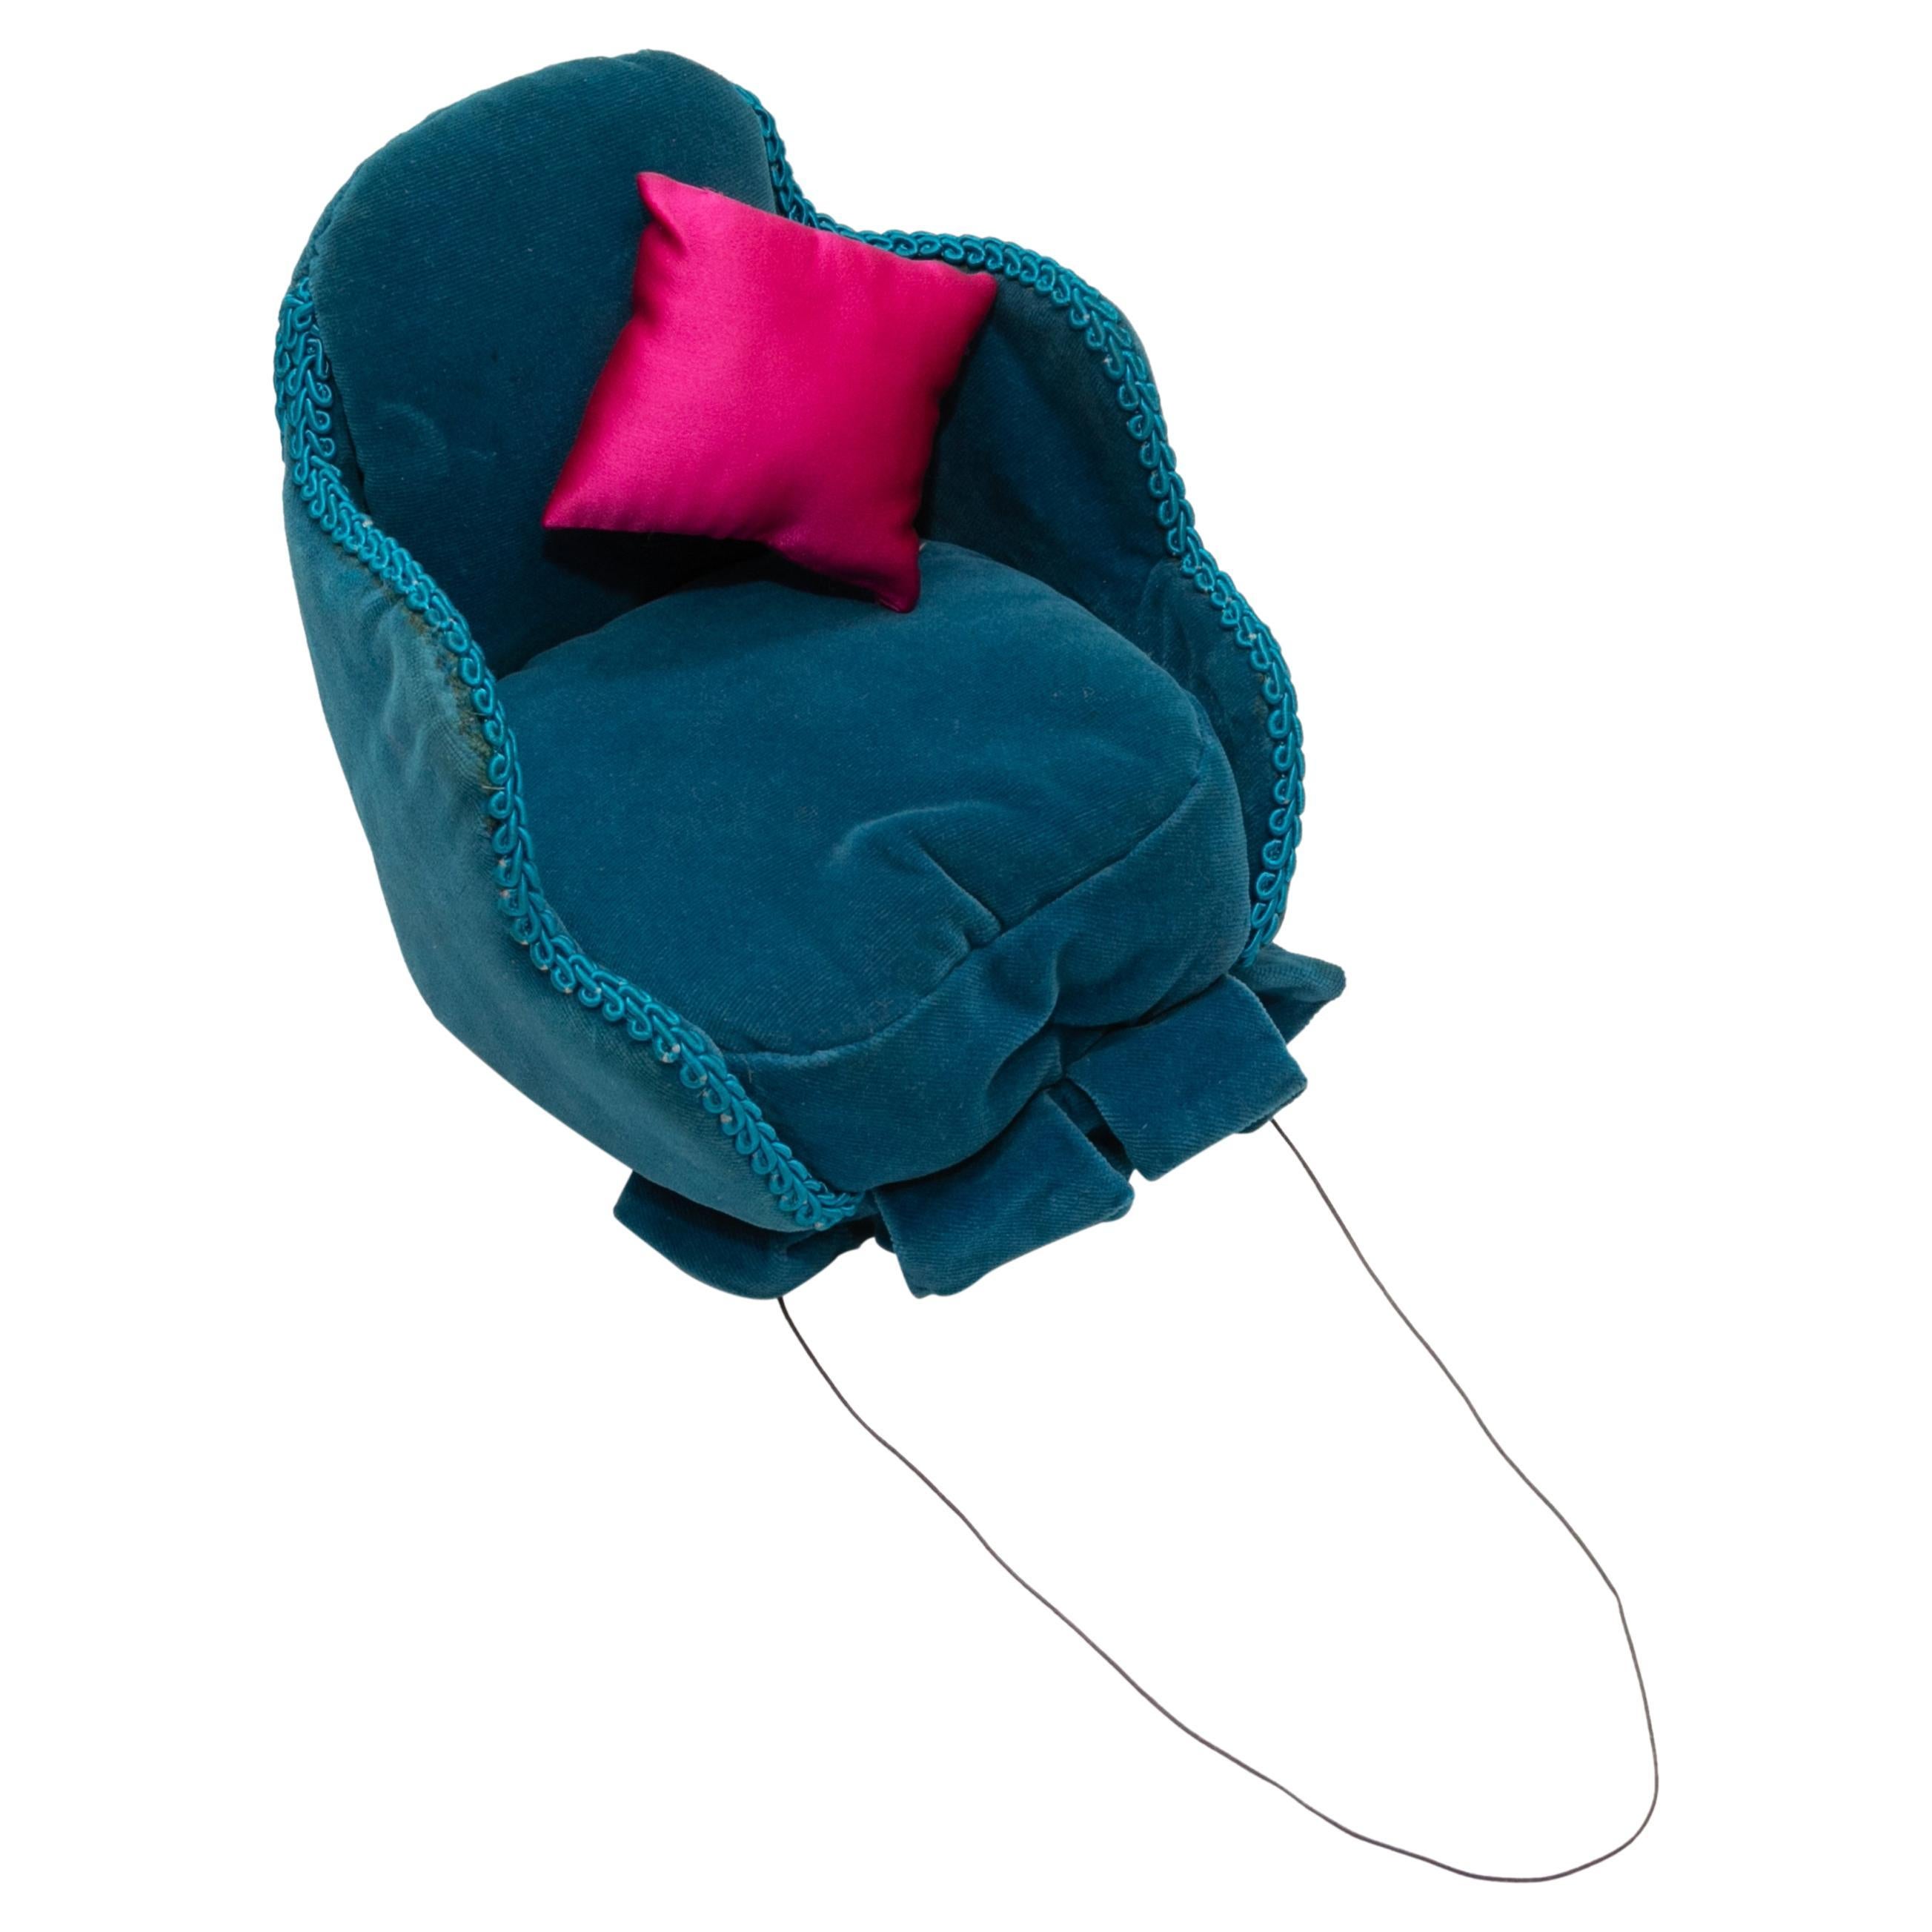 Vintage Teal & Fuchsia Karl Lagerfeld 1985 Chair Hat For Sale